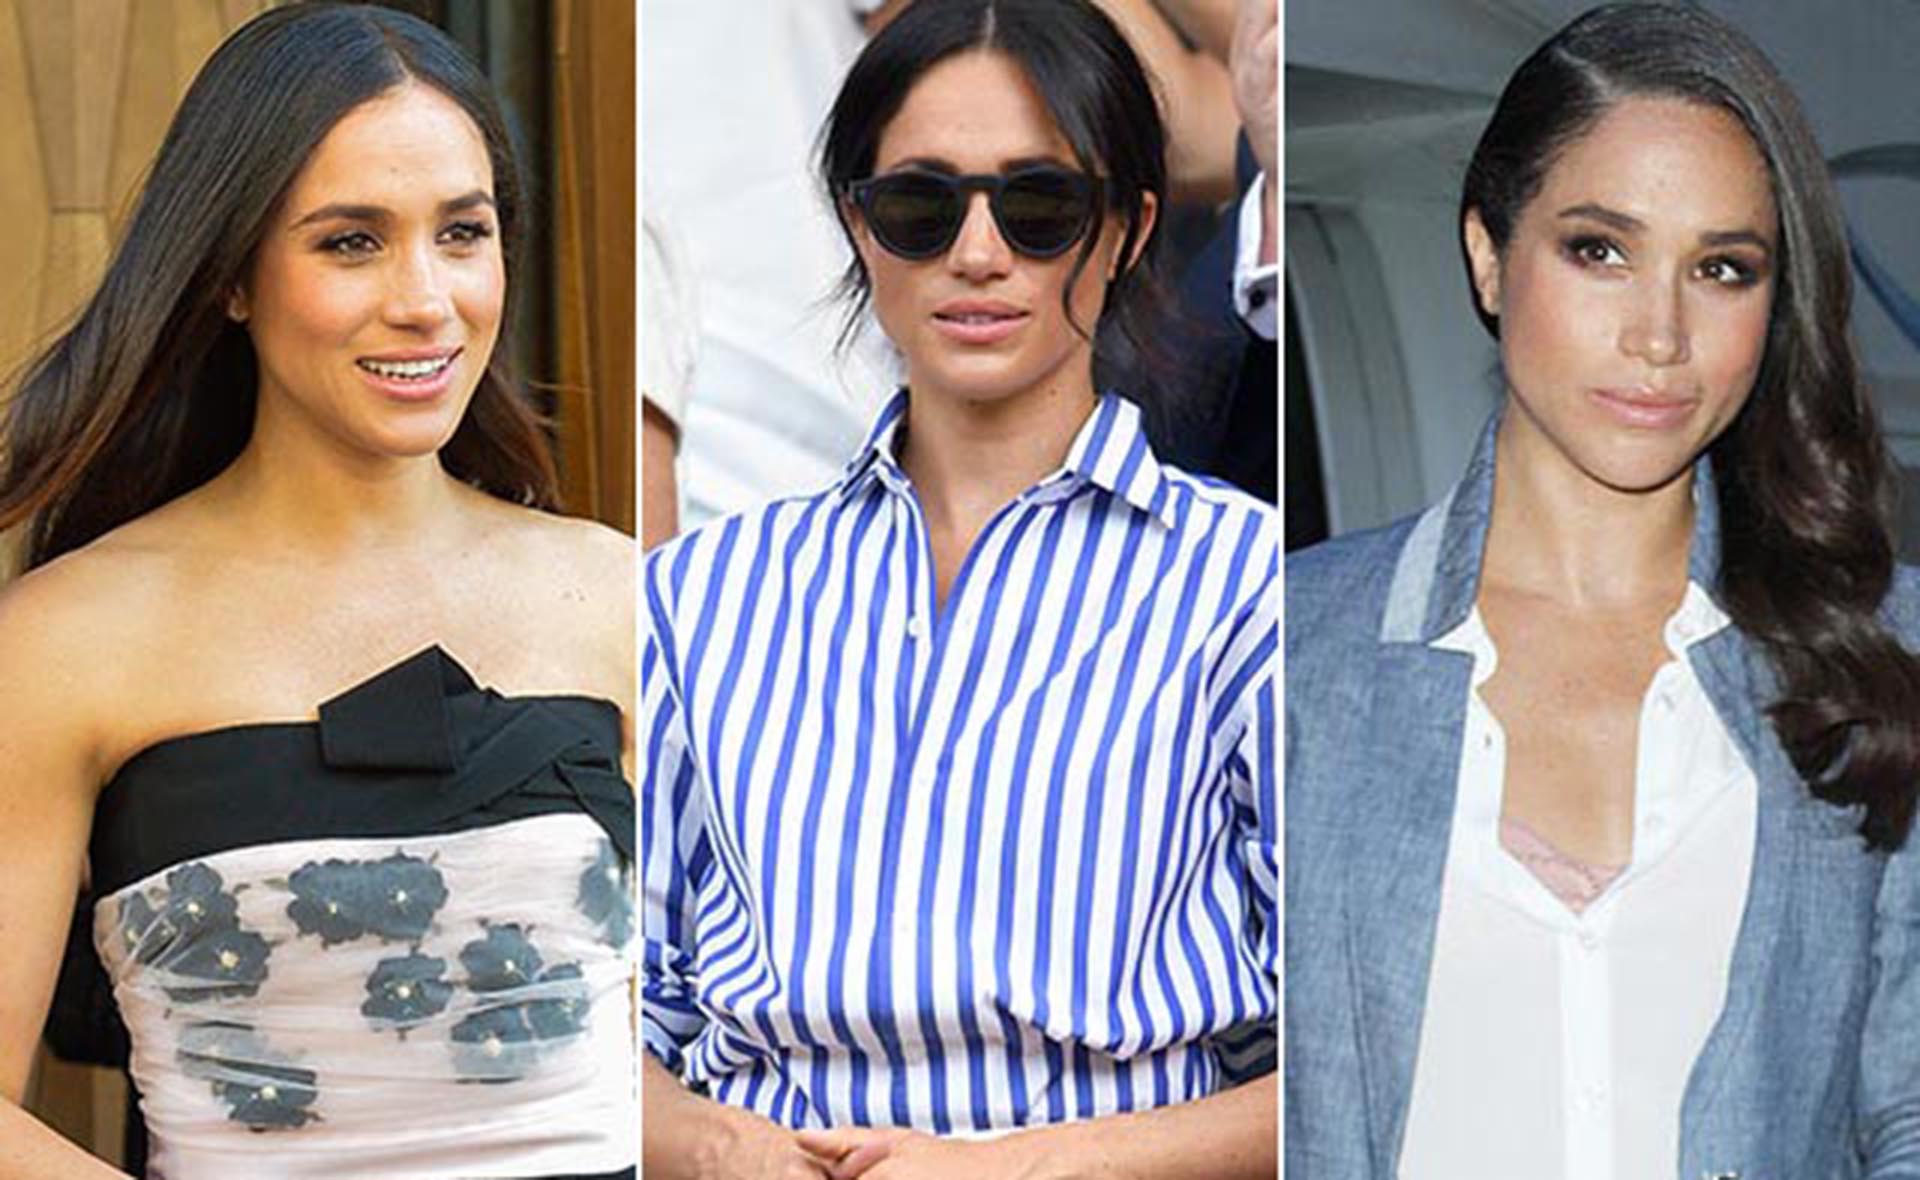 Meghan Markle’s off-duty style has provided a glorious mood-board of inspiration – see her best looks